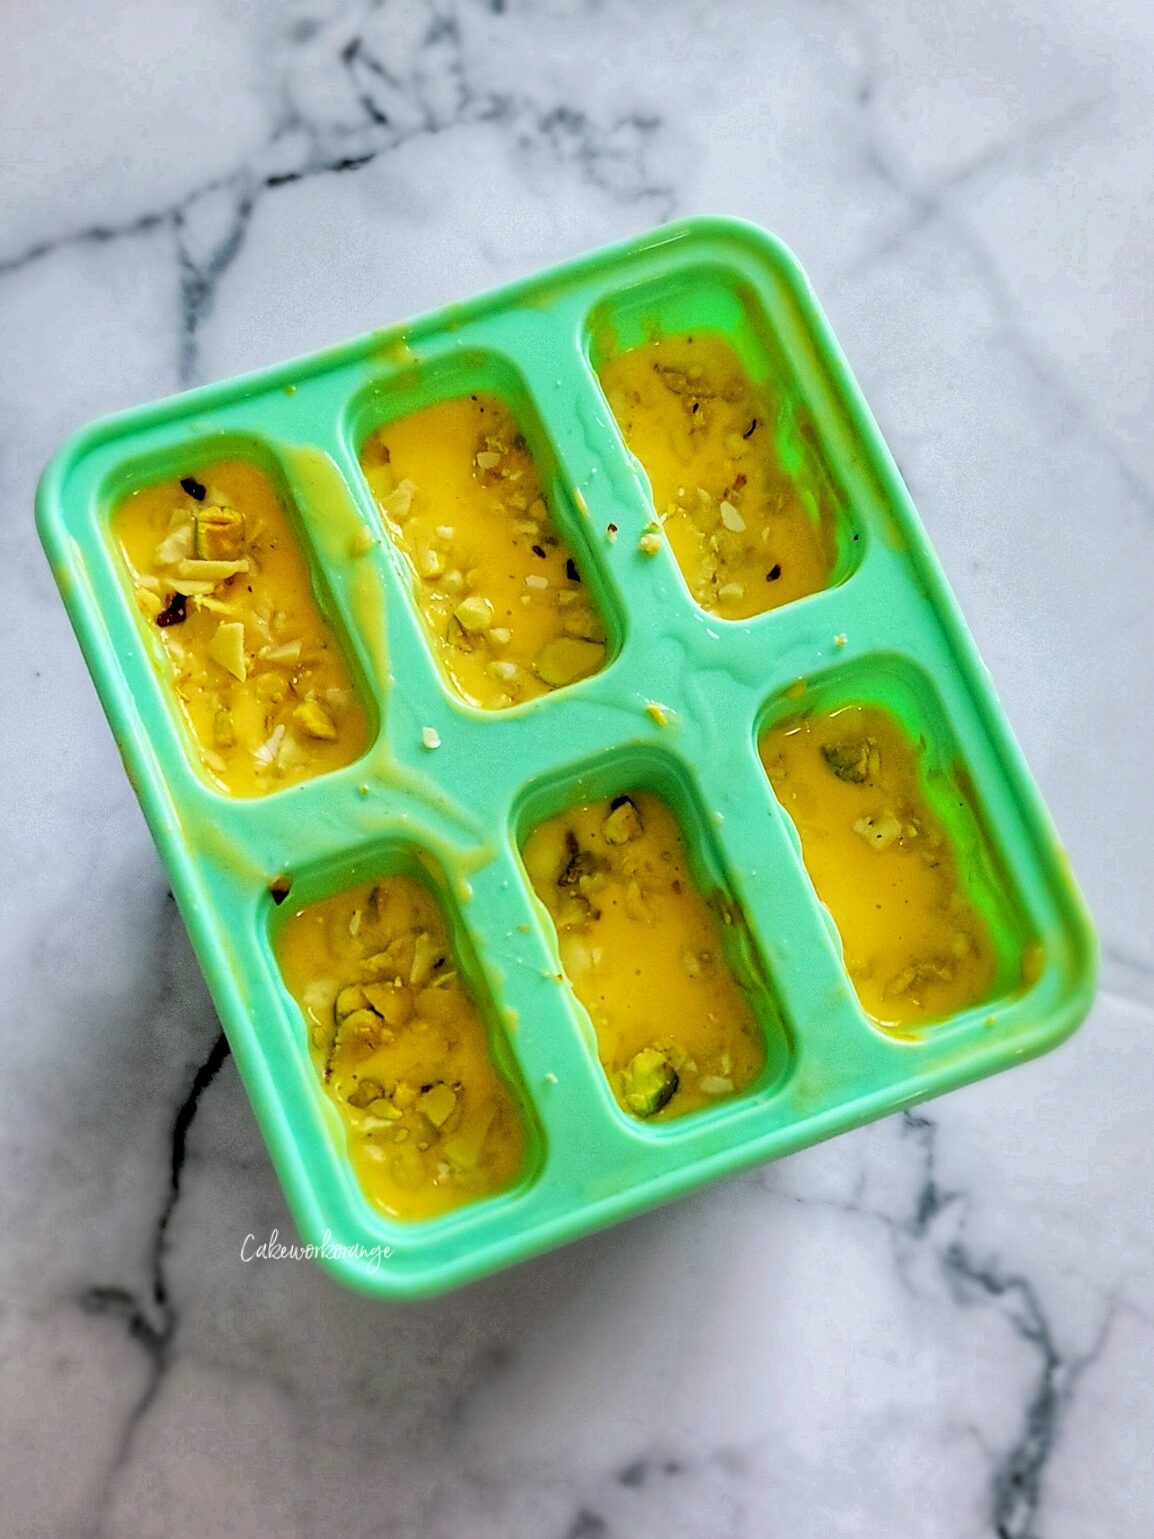 Transfer the mango mixture to popsicle mold and freeze overnight